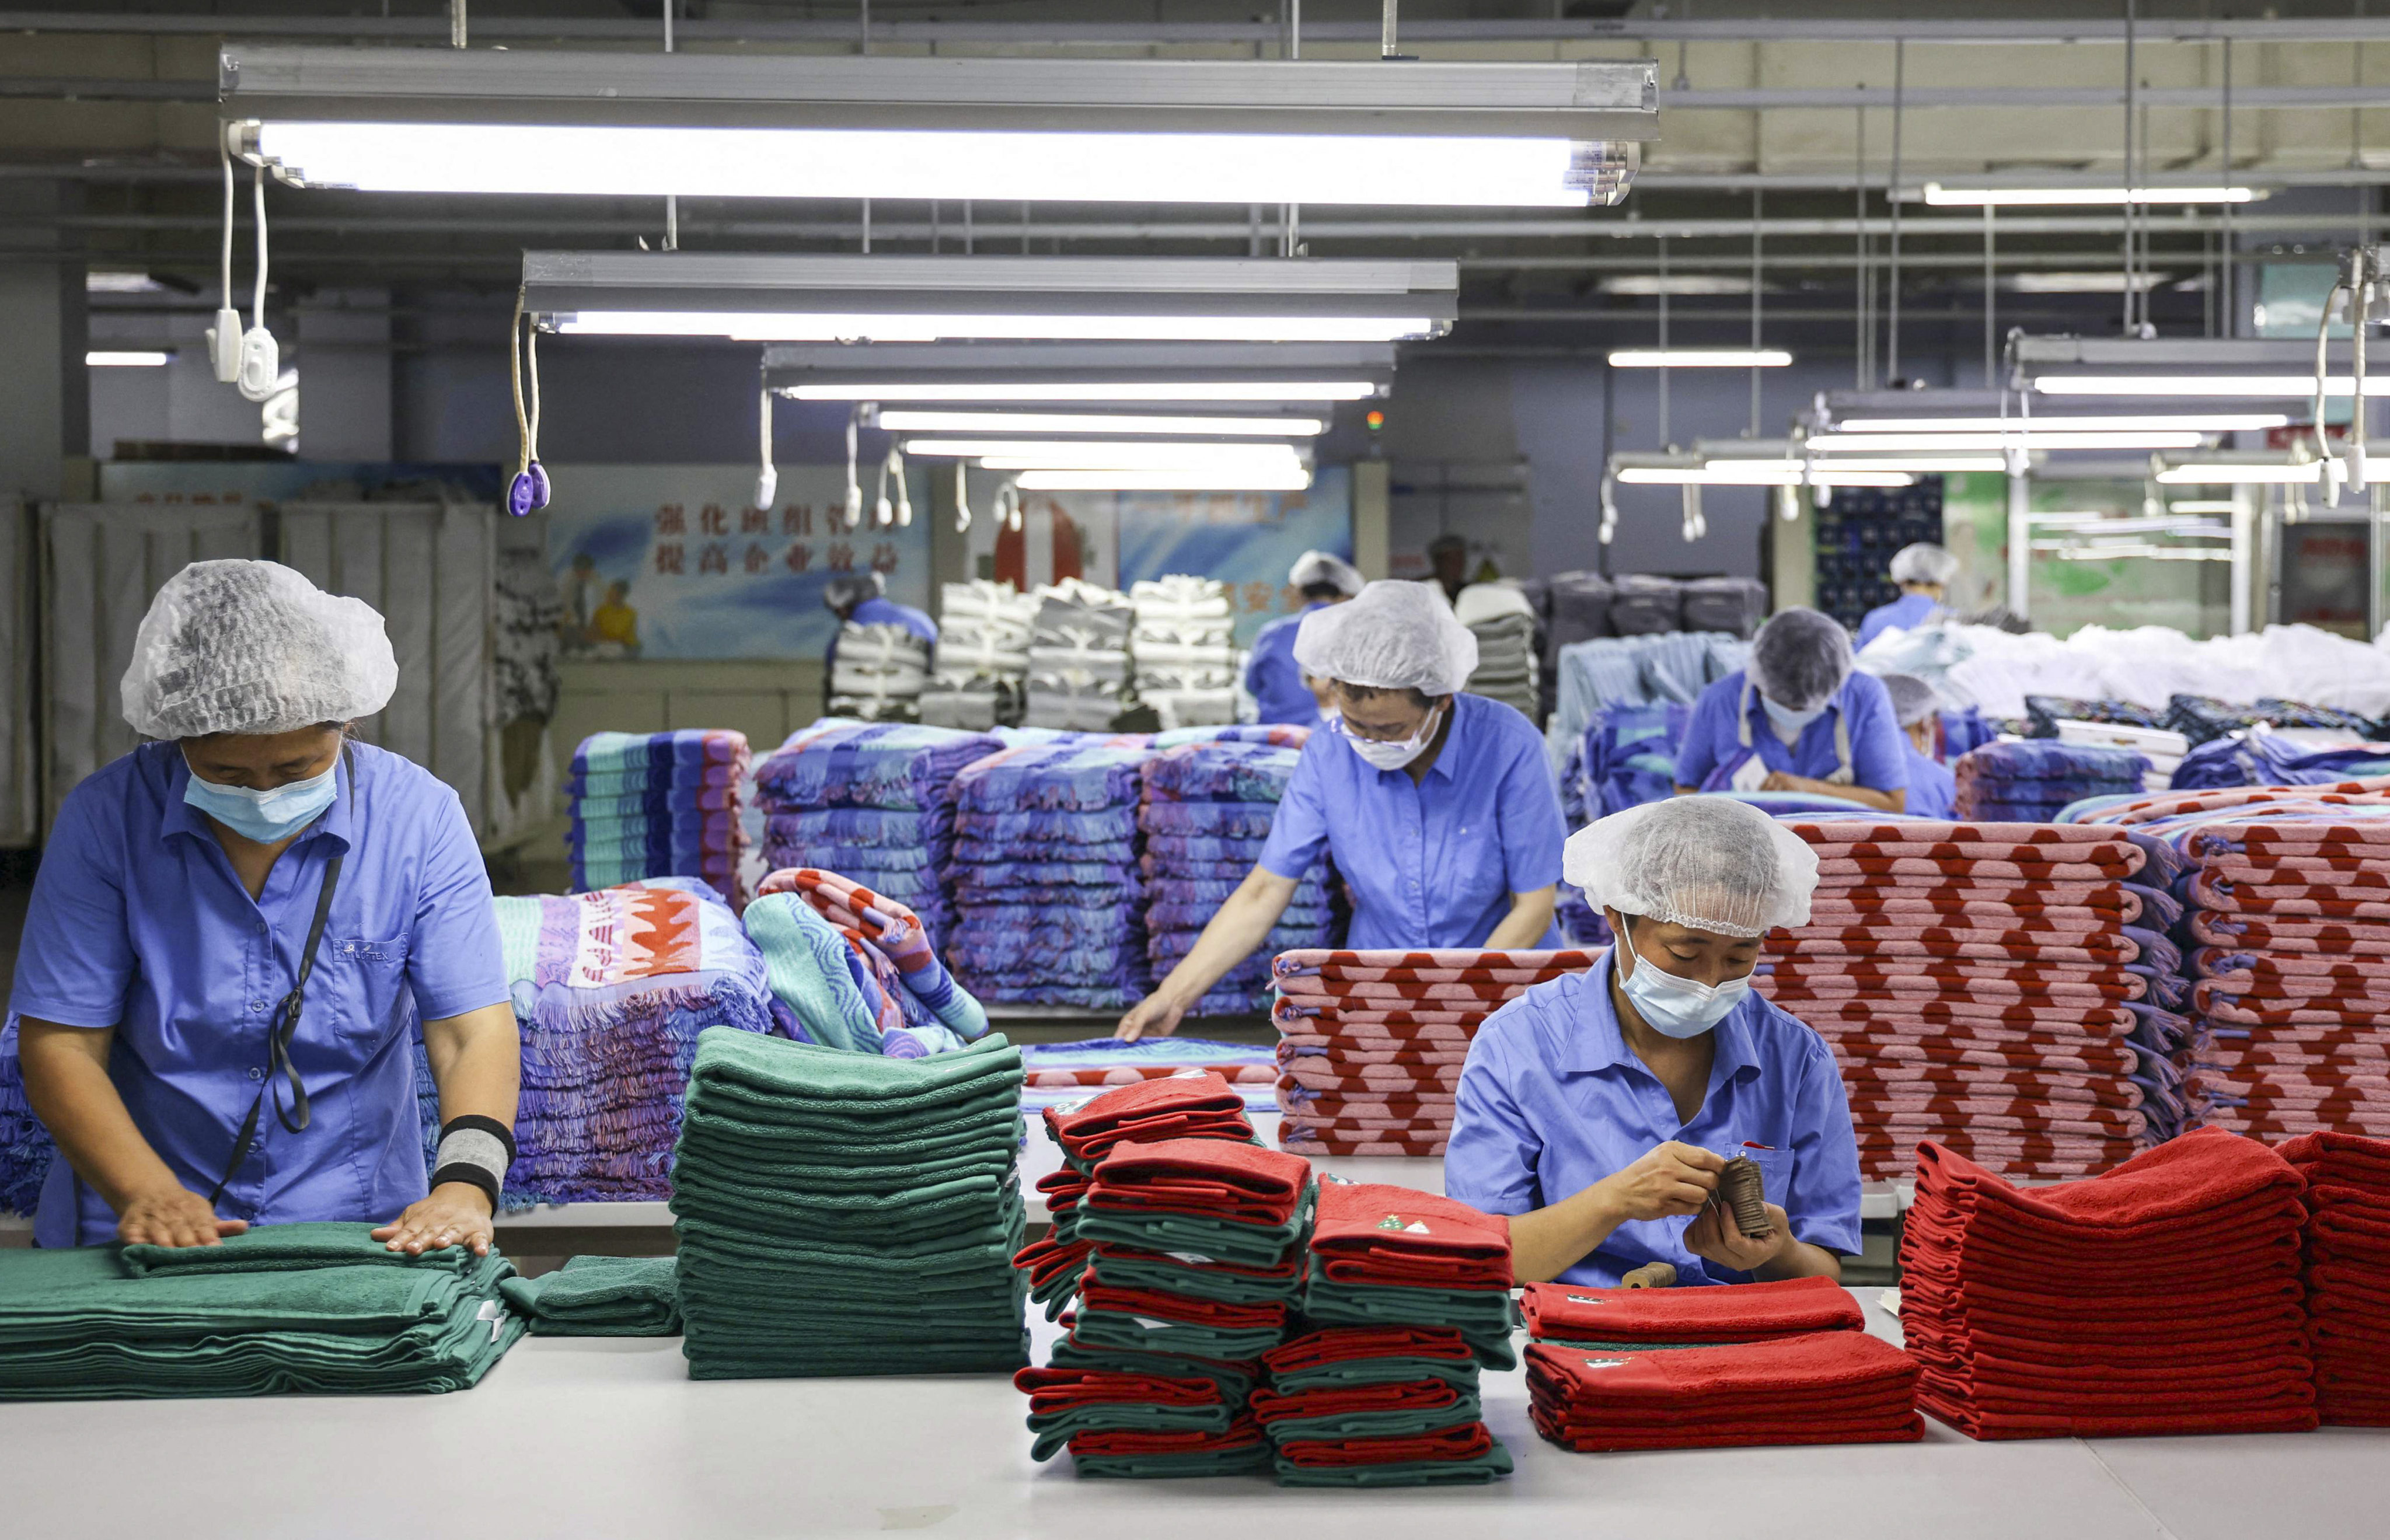 Demographers say that long-held manufacturing advantages still give China an edge over India. Photo: AFP